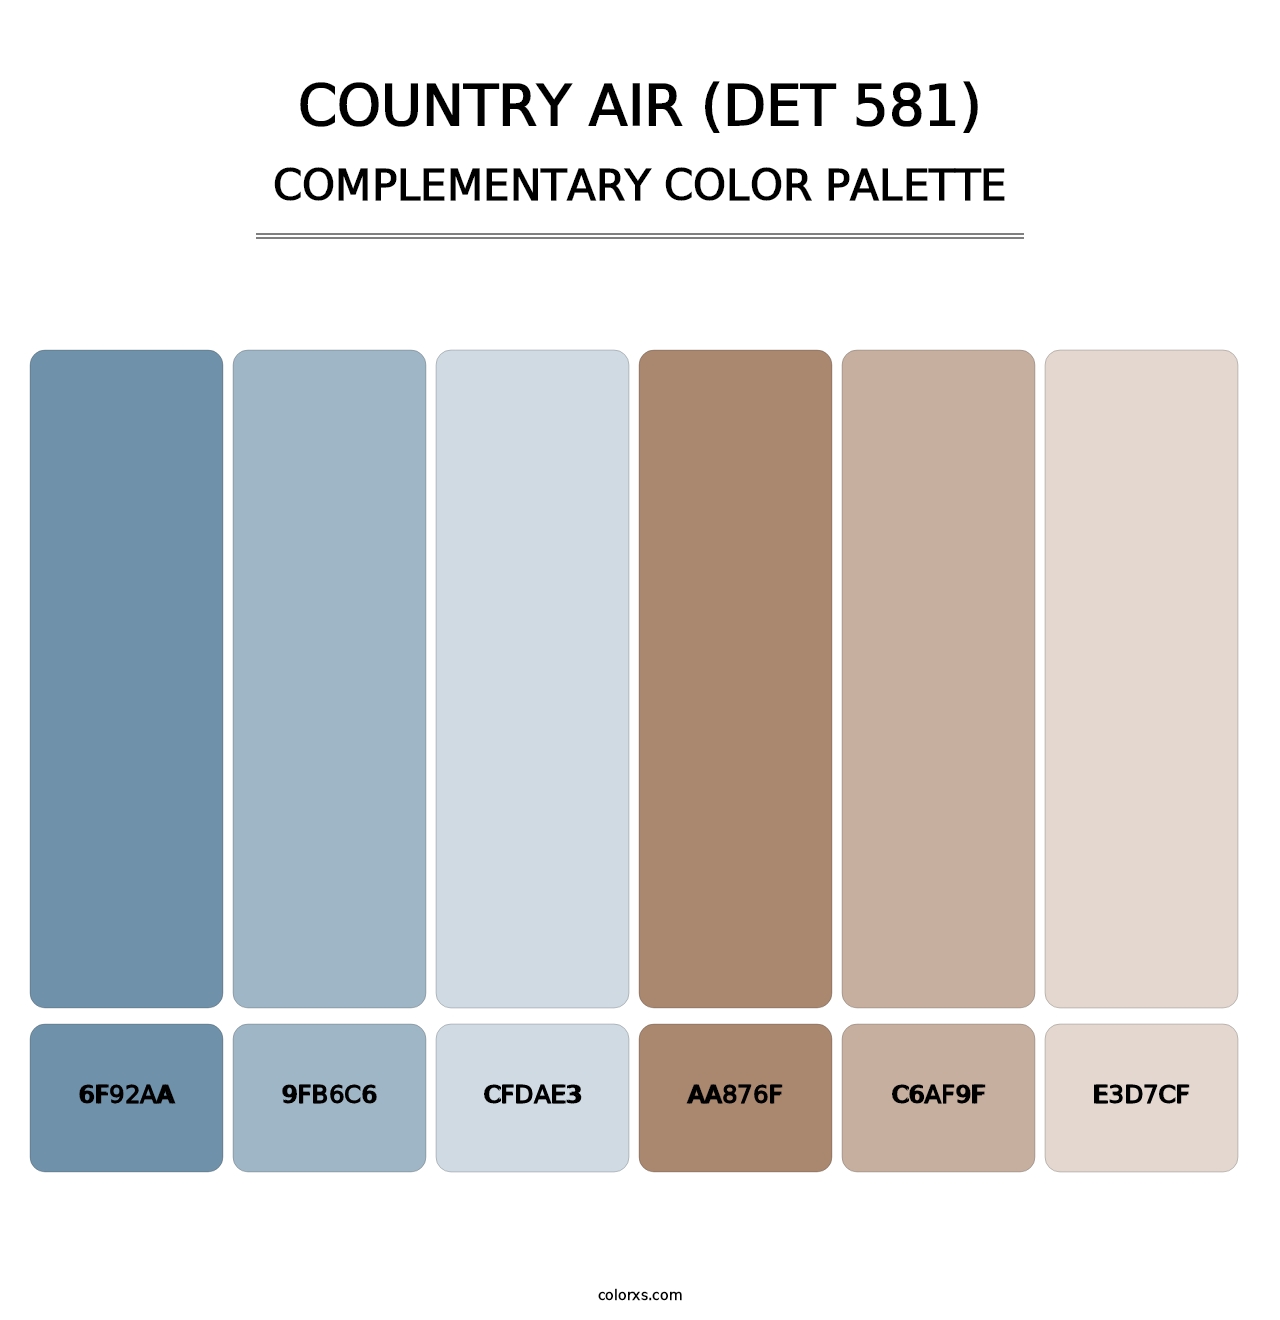 Country Air (DET 581) - Complementary Color Palette